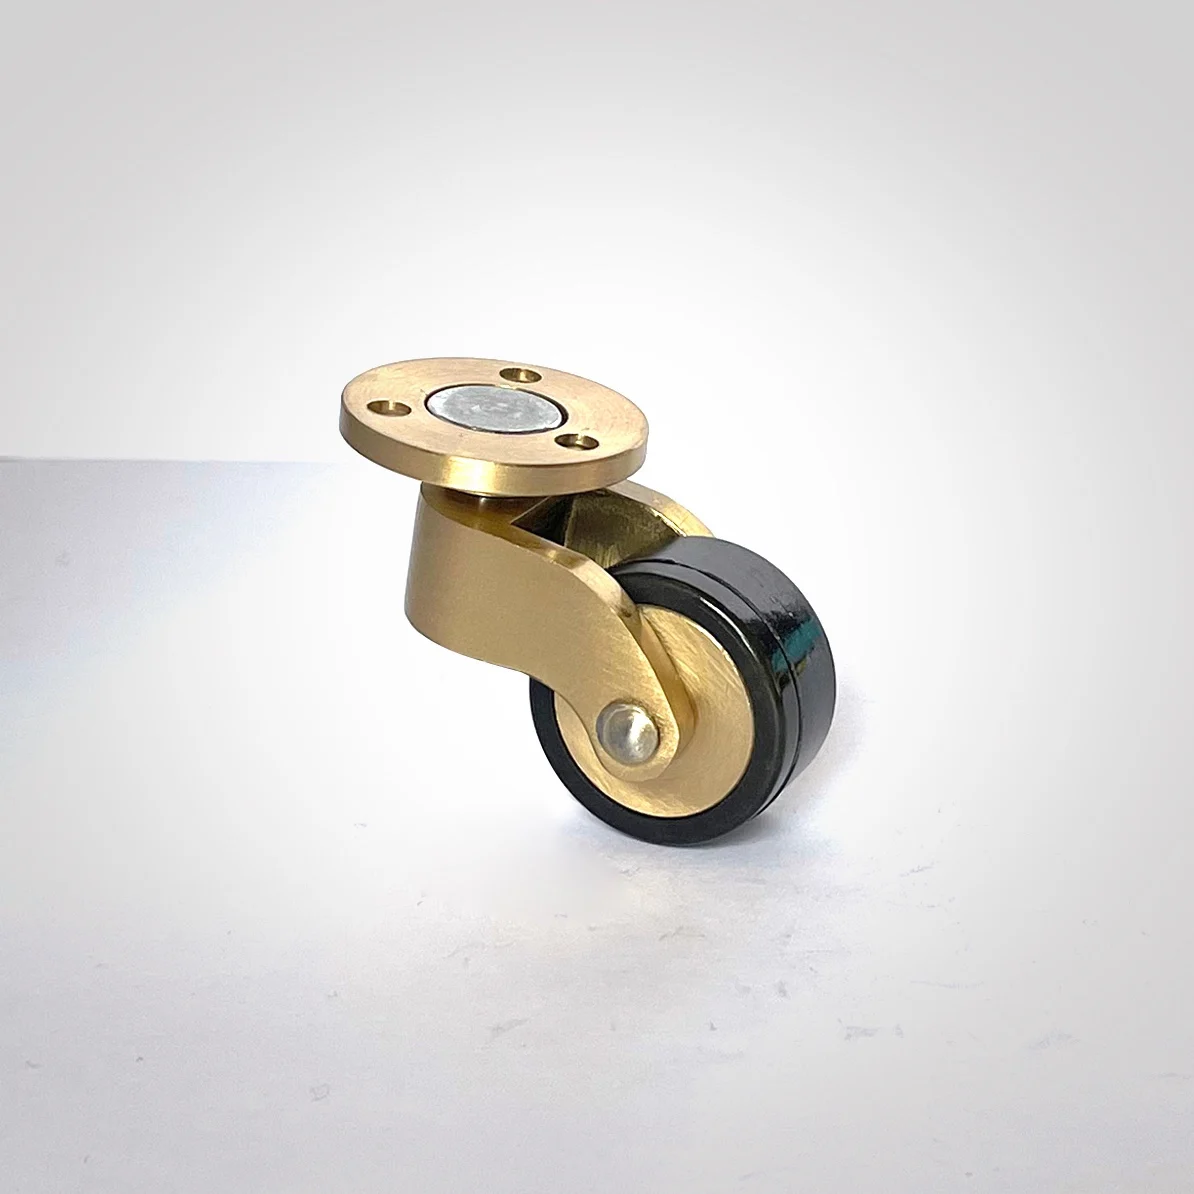 Copper Casters European-Style Furniture Sofa Casters Non-Rod round Casters/Universal Wheels